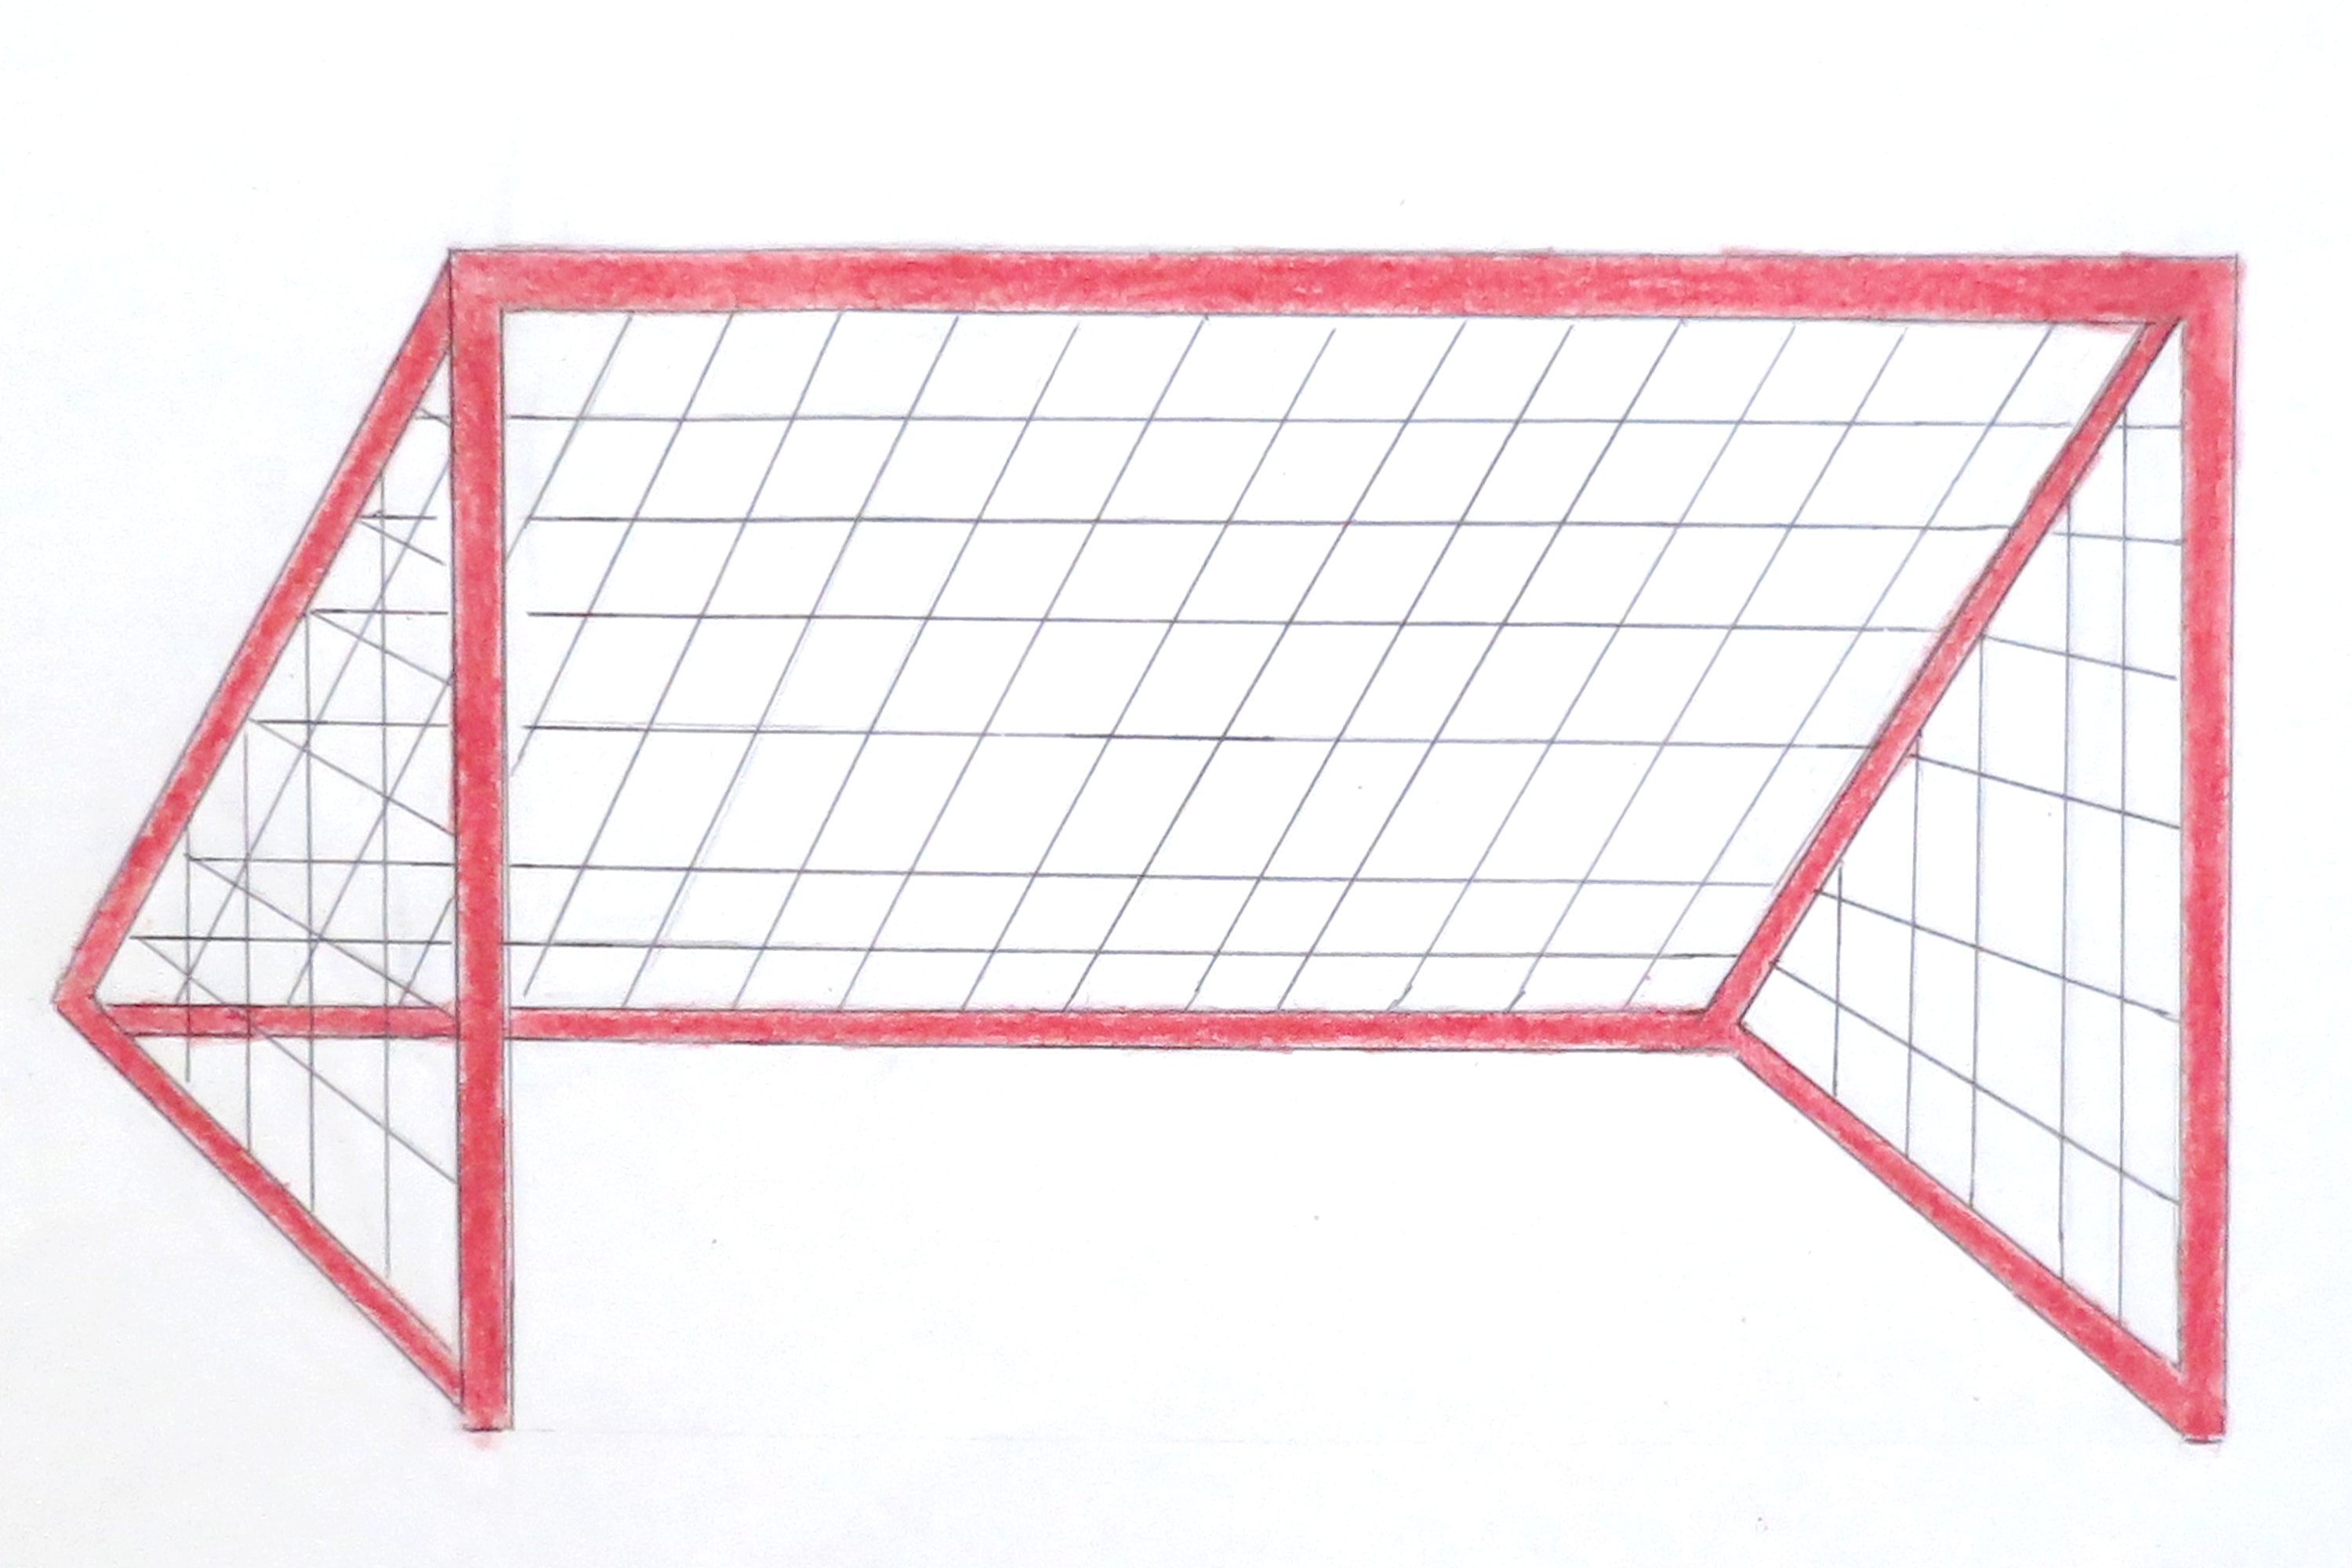 How to Draw a Soccer Goal (with Pictures) eHow